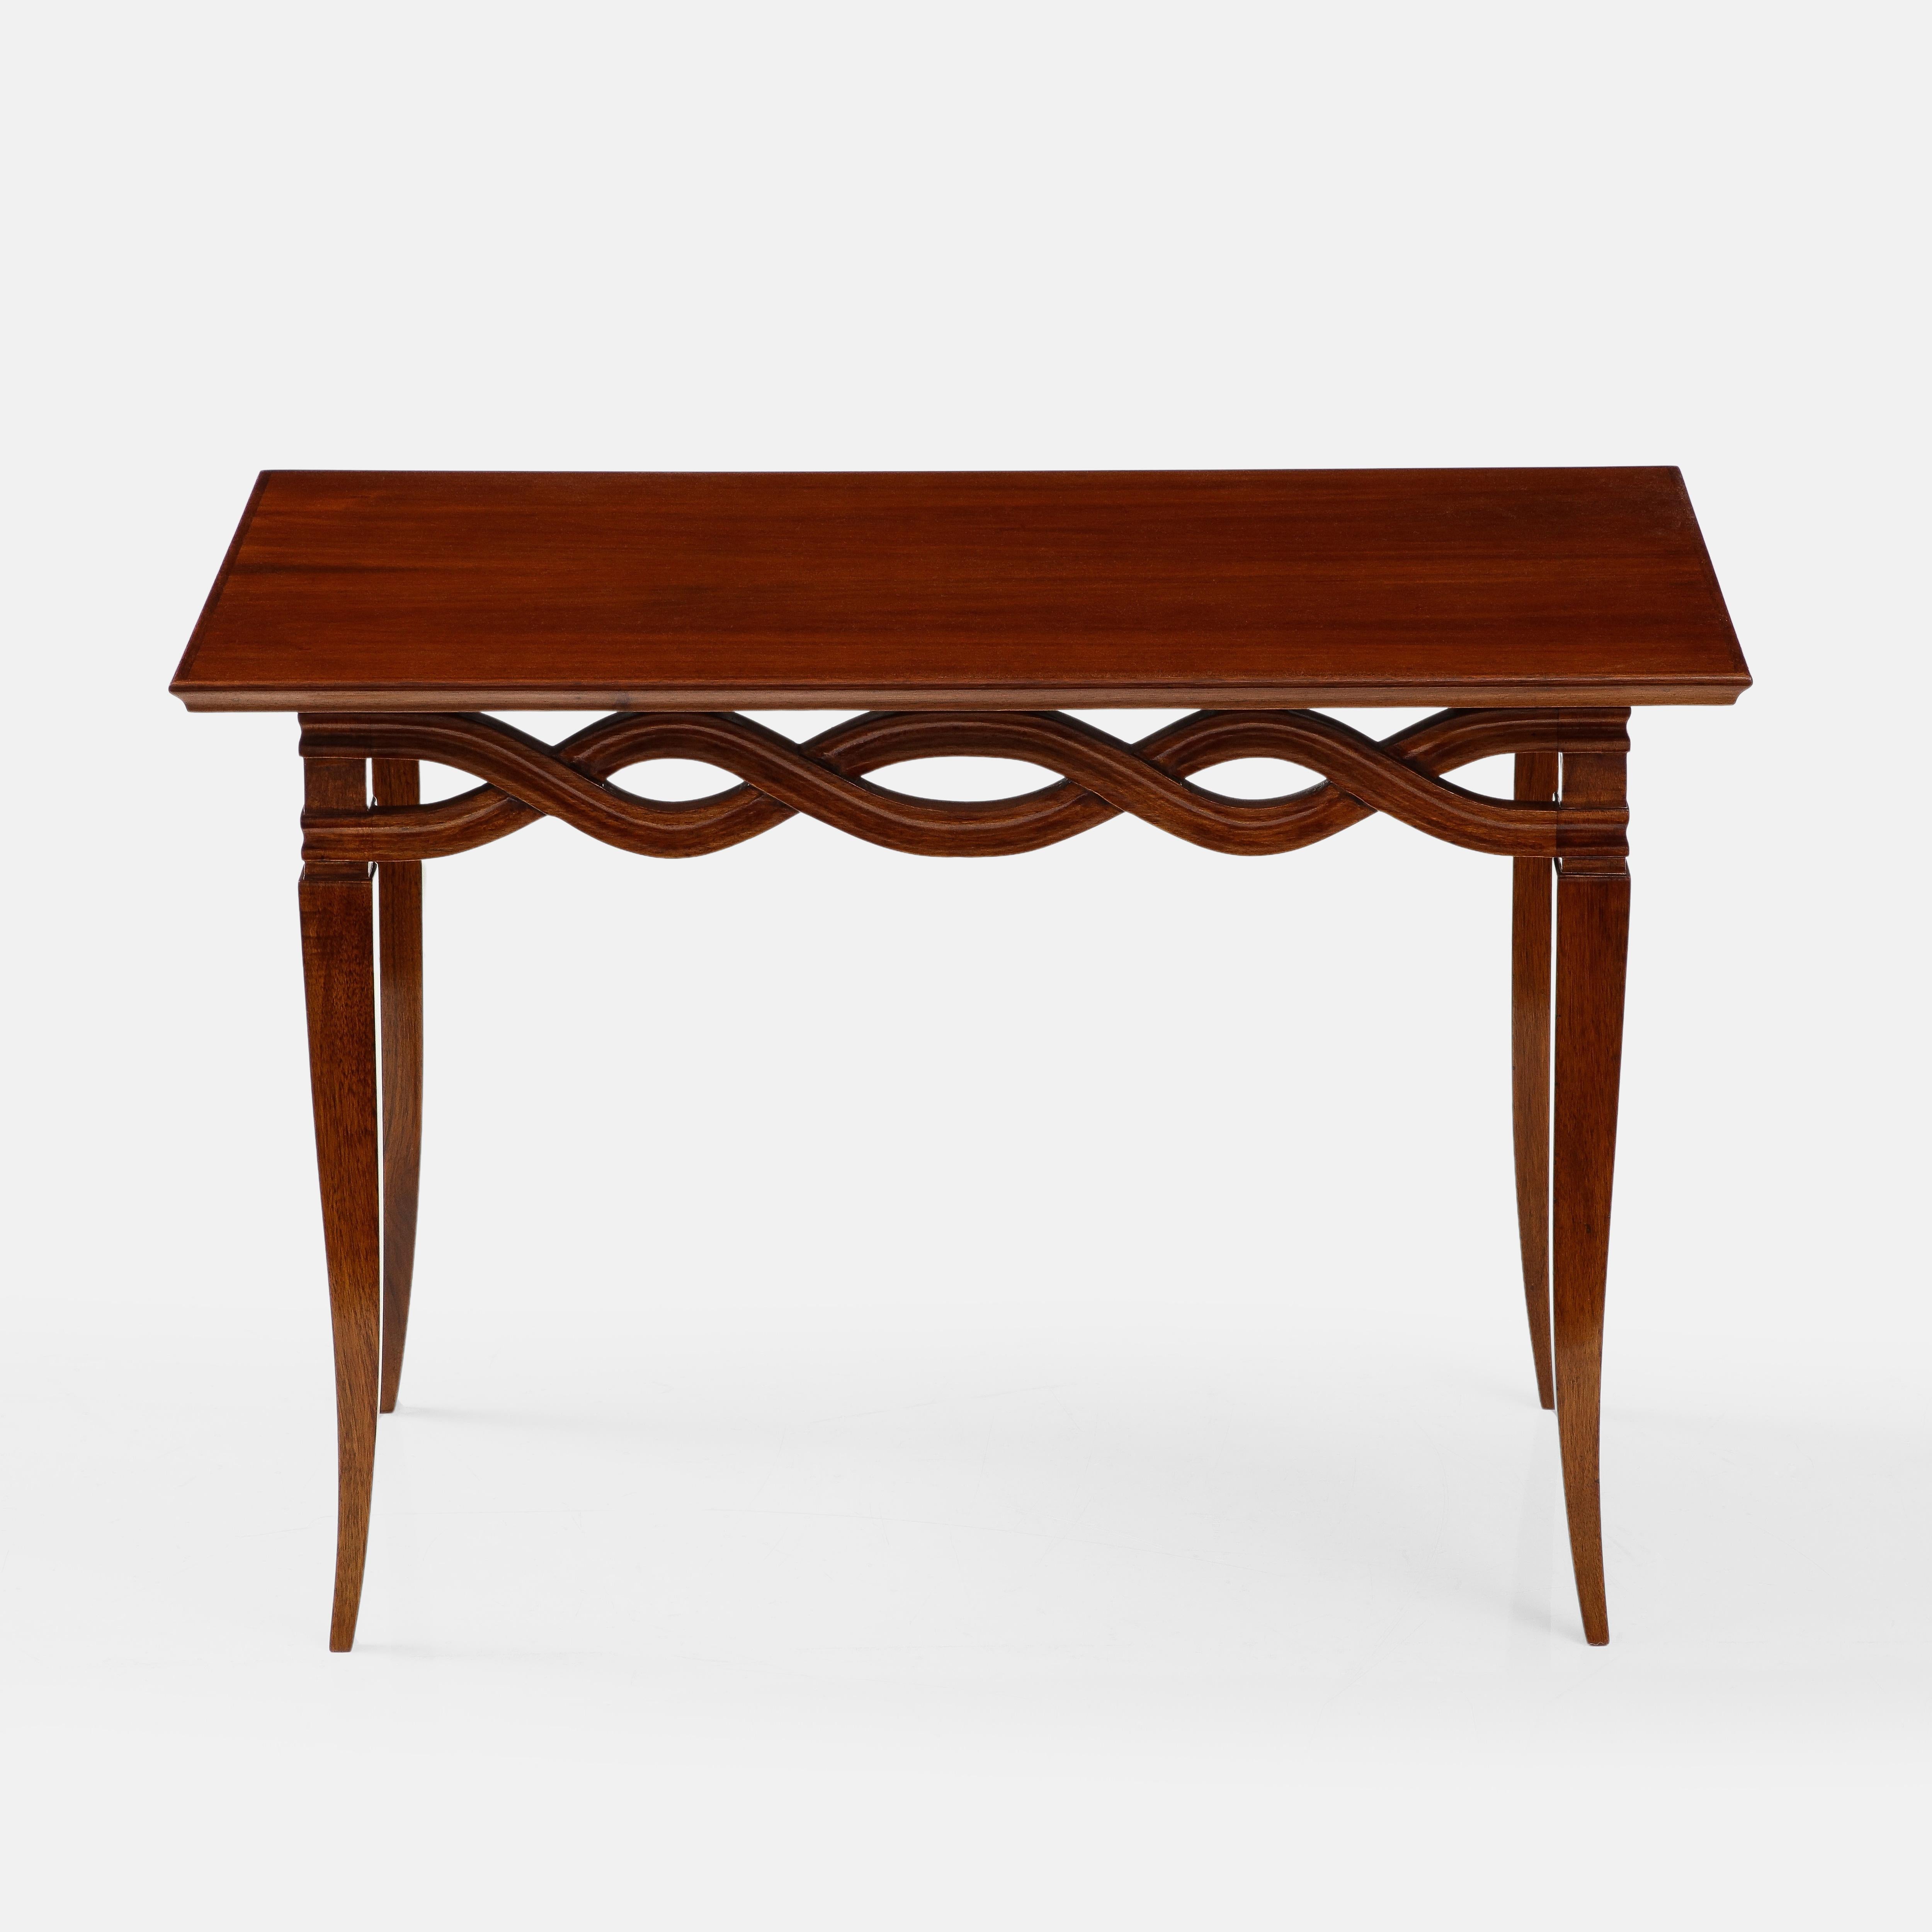 Rare and exquisite small coffee or side table in walnut, attributed to Paolo Buffa, 1940s. This rectangular coffee or  cocktail table has a beautifully grained walnut wood top, intricately carved wood pattern apron and end in elegant tapering